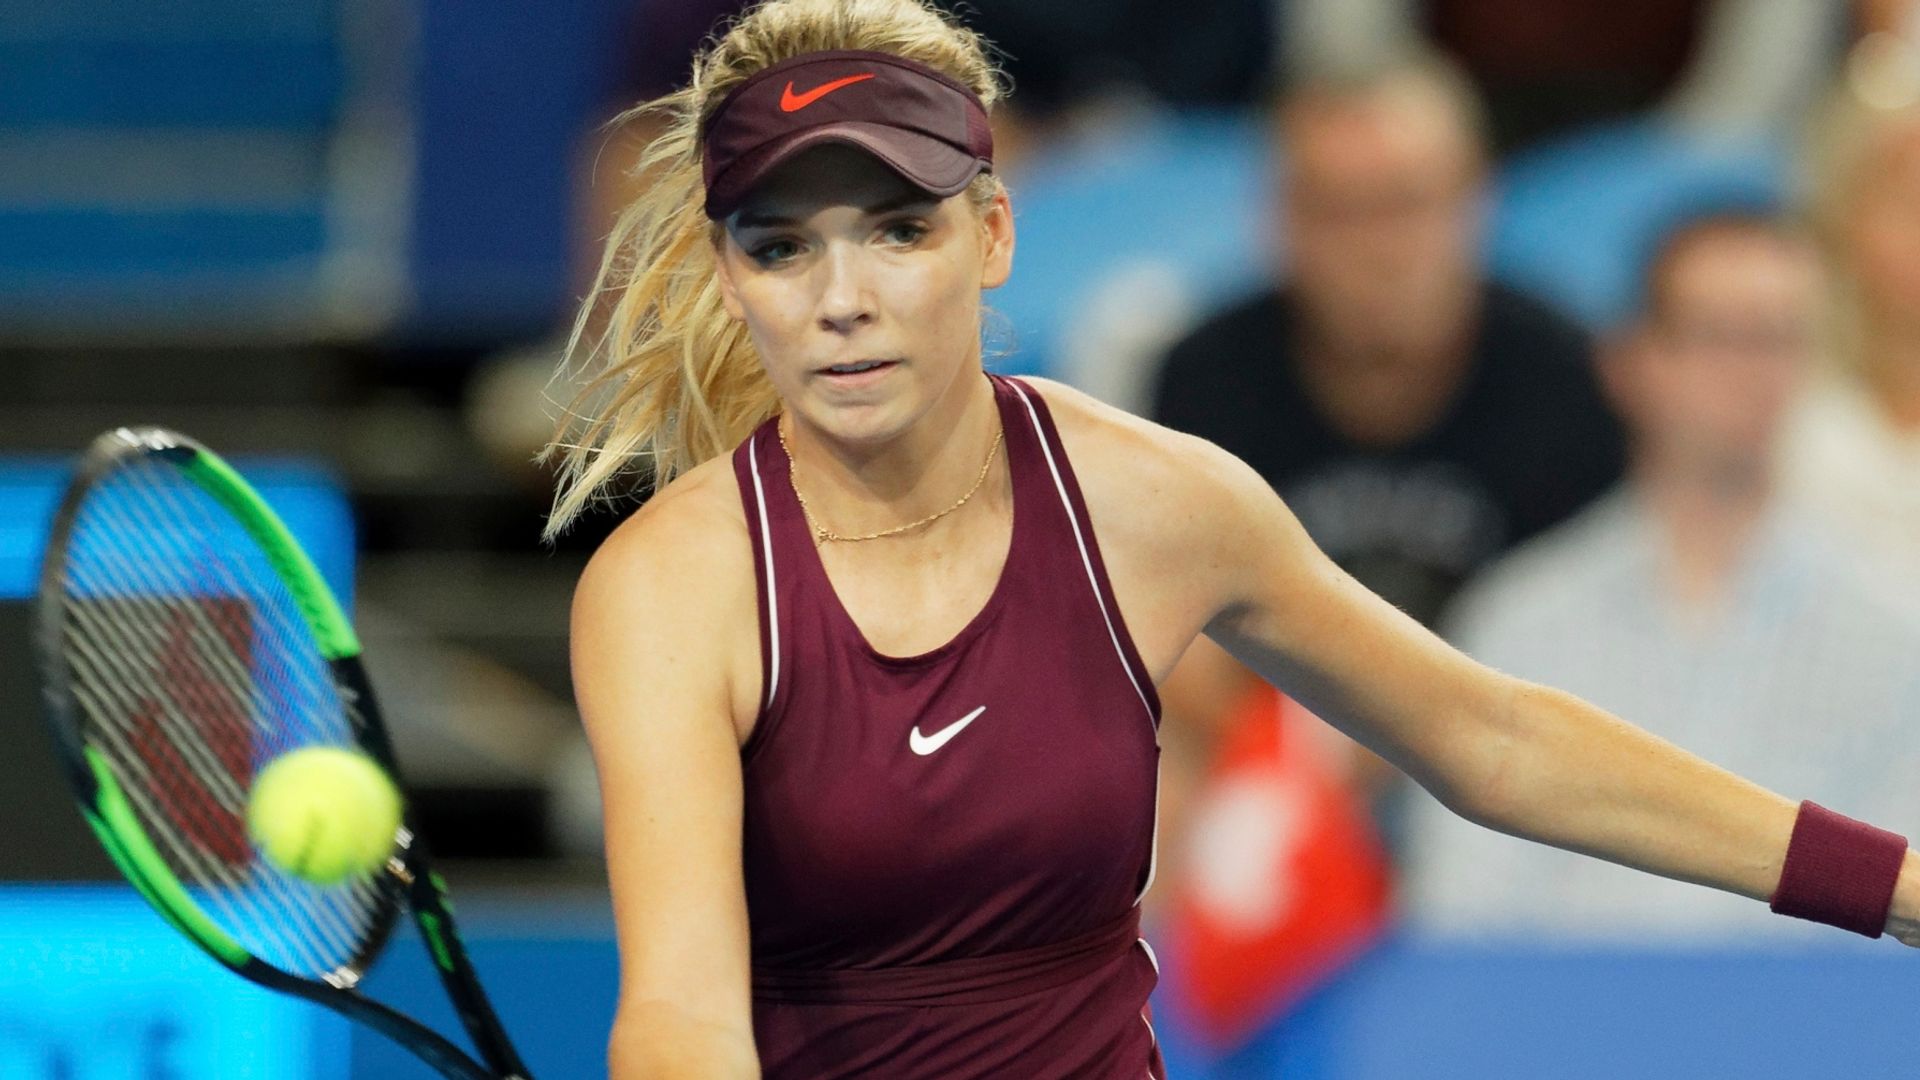 Britain's Katie Boulter is getting closer to where she wants to be hea...